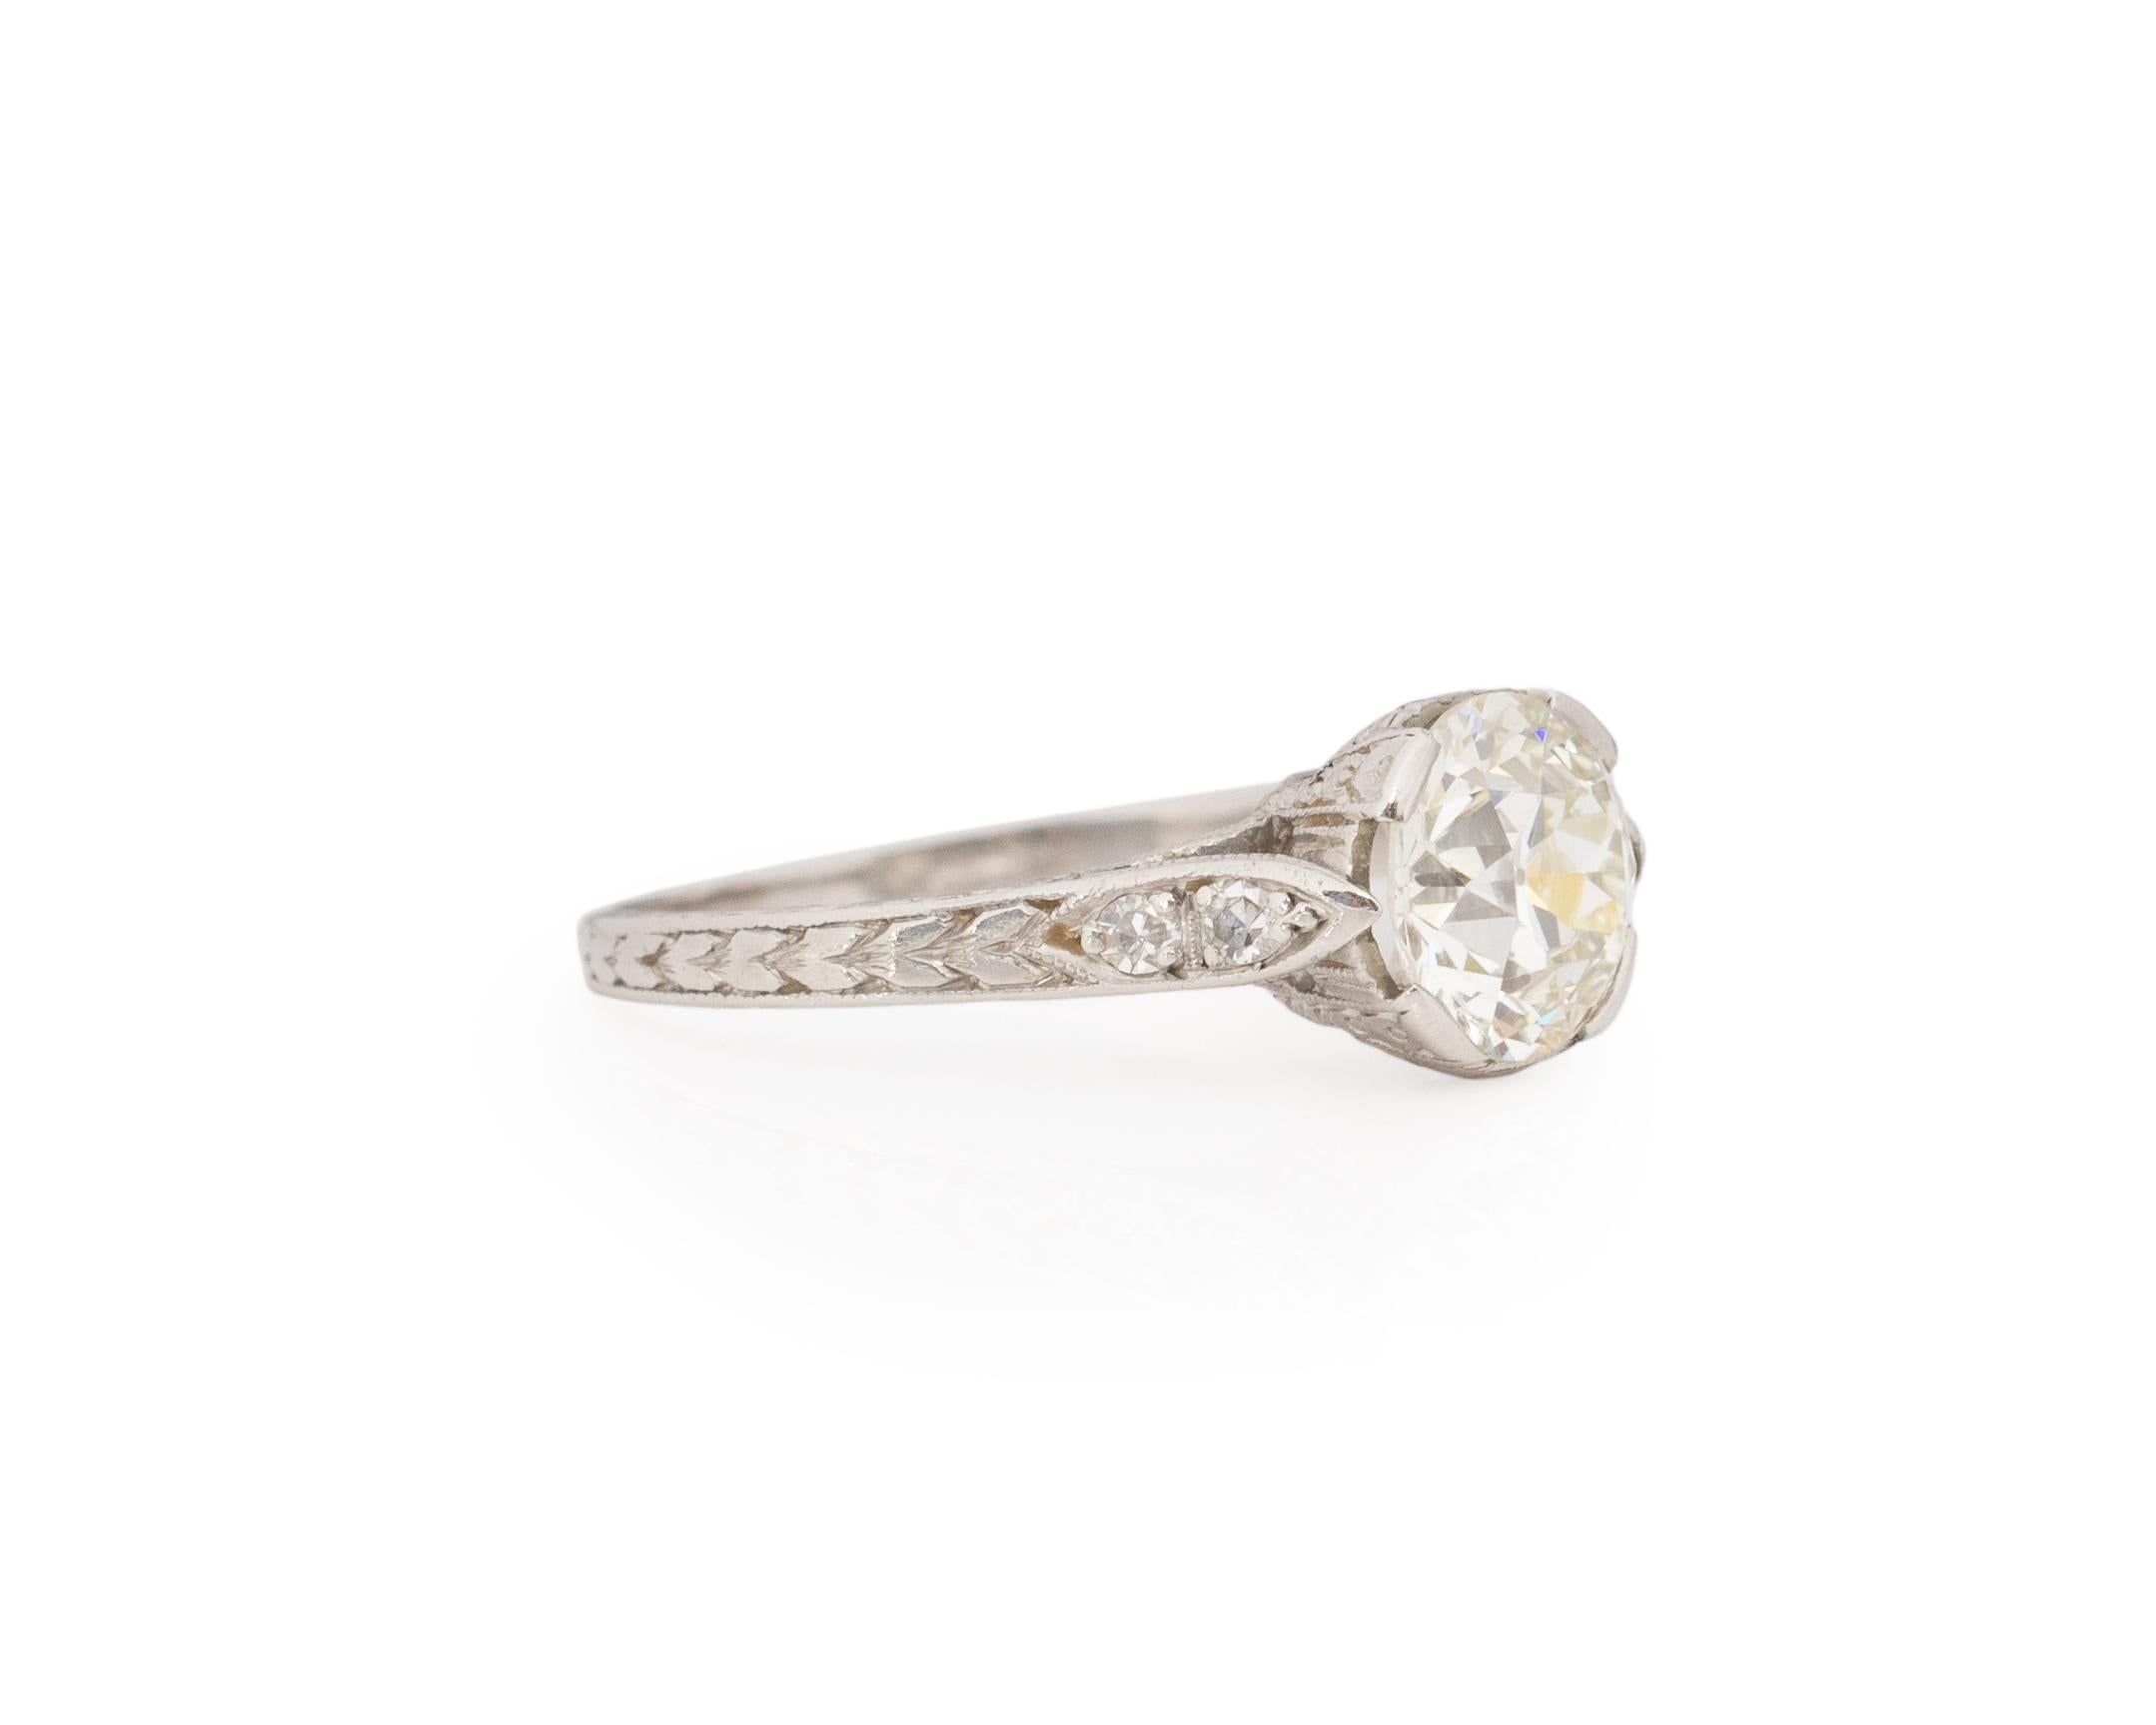 Ring Size: 5
Metal Type: Platinum [Hallmarked, and Tested]
Weight: 2.8grams

Center Diamond Details:
GIA LAB REPORT #:2195877246
Weight: 1.38ct
Cut: Old European brilliant
Color: L
Clarity: SI1
Measurements: 7.13mm x 6.93mm x 4.40mm

Finger to Top